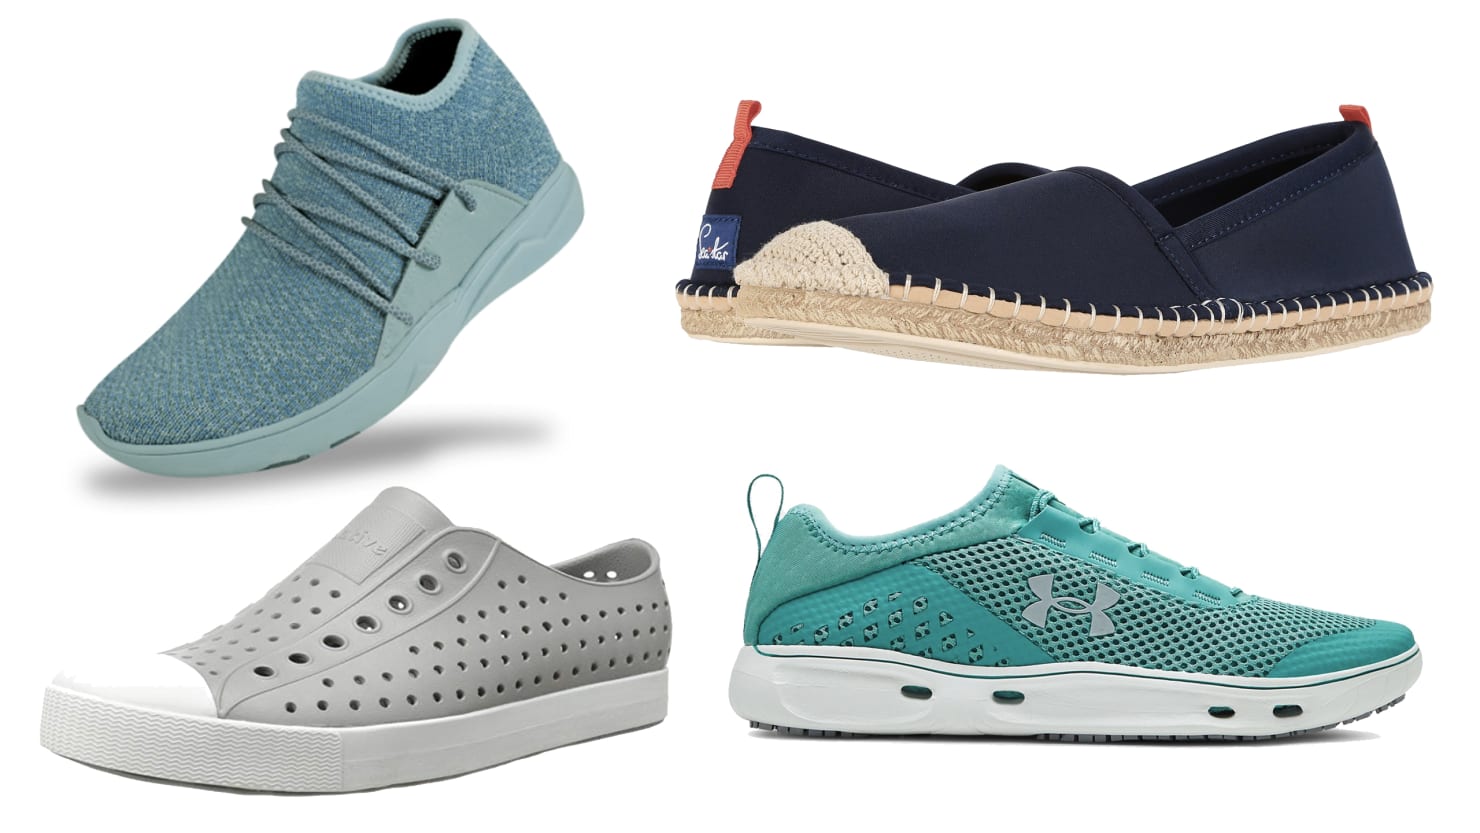 Shop Waterproof Shoes for Summer